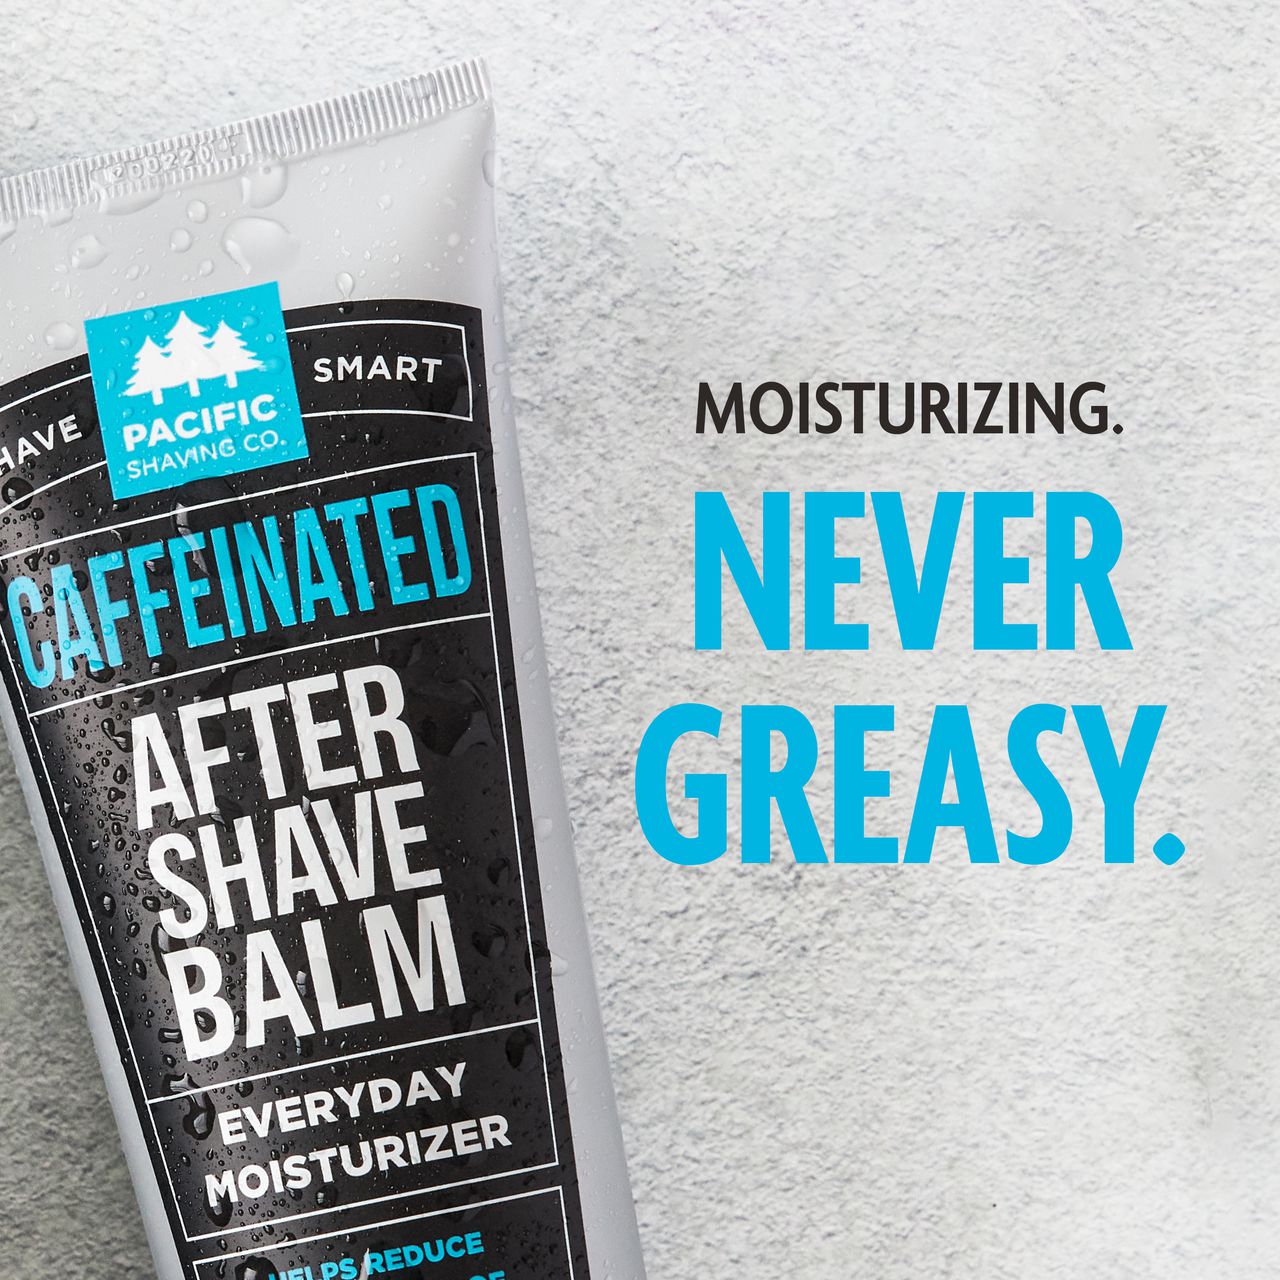 Caffeinated Aftershave by Pacific Shaving Company. This outstanding aftershave moisturizer utilizes the many benefits of naturally-derived caffeine to help liven up your morning shave routine. It will give you an exceptional shave, help reduce the appearance of redness, and keep your skin looking and feeling healthy all day. It may not replace your morning coffee, but it will give a little extra kick to your morning routine. A little goes a long way.